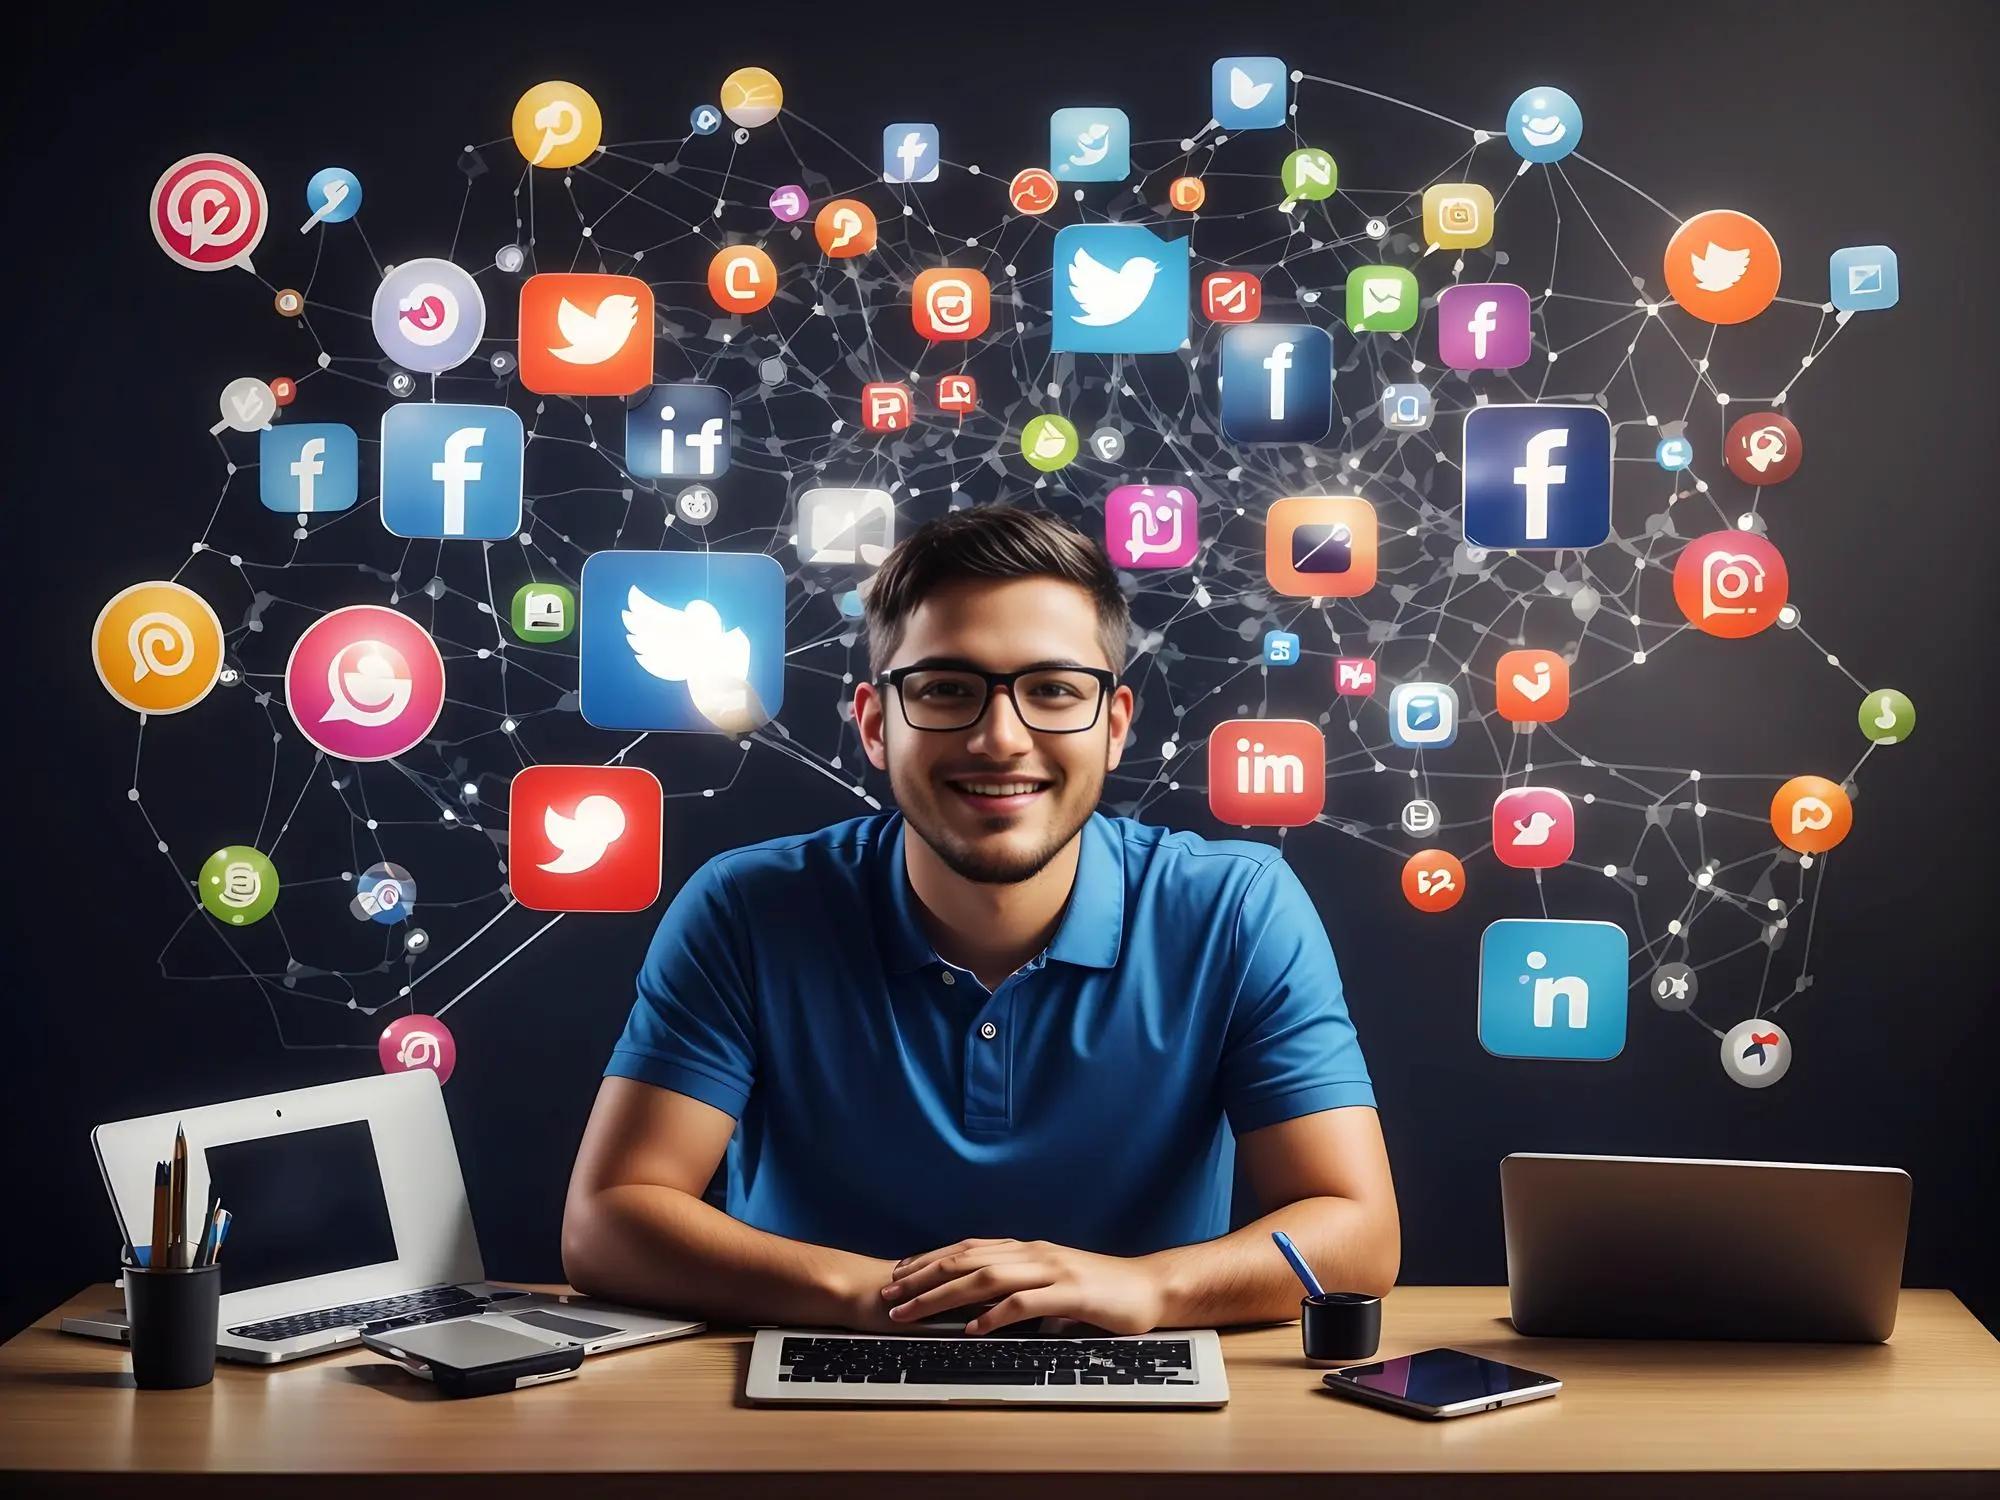 Smiling young man with glasses seated at a desk surrounded by a dynamic array of floating social media icons, indicating his connection to digital marketing and social media management